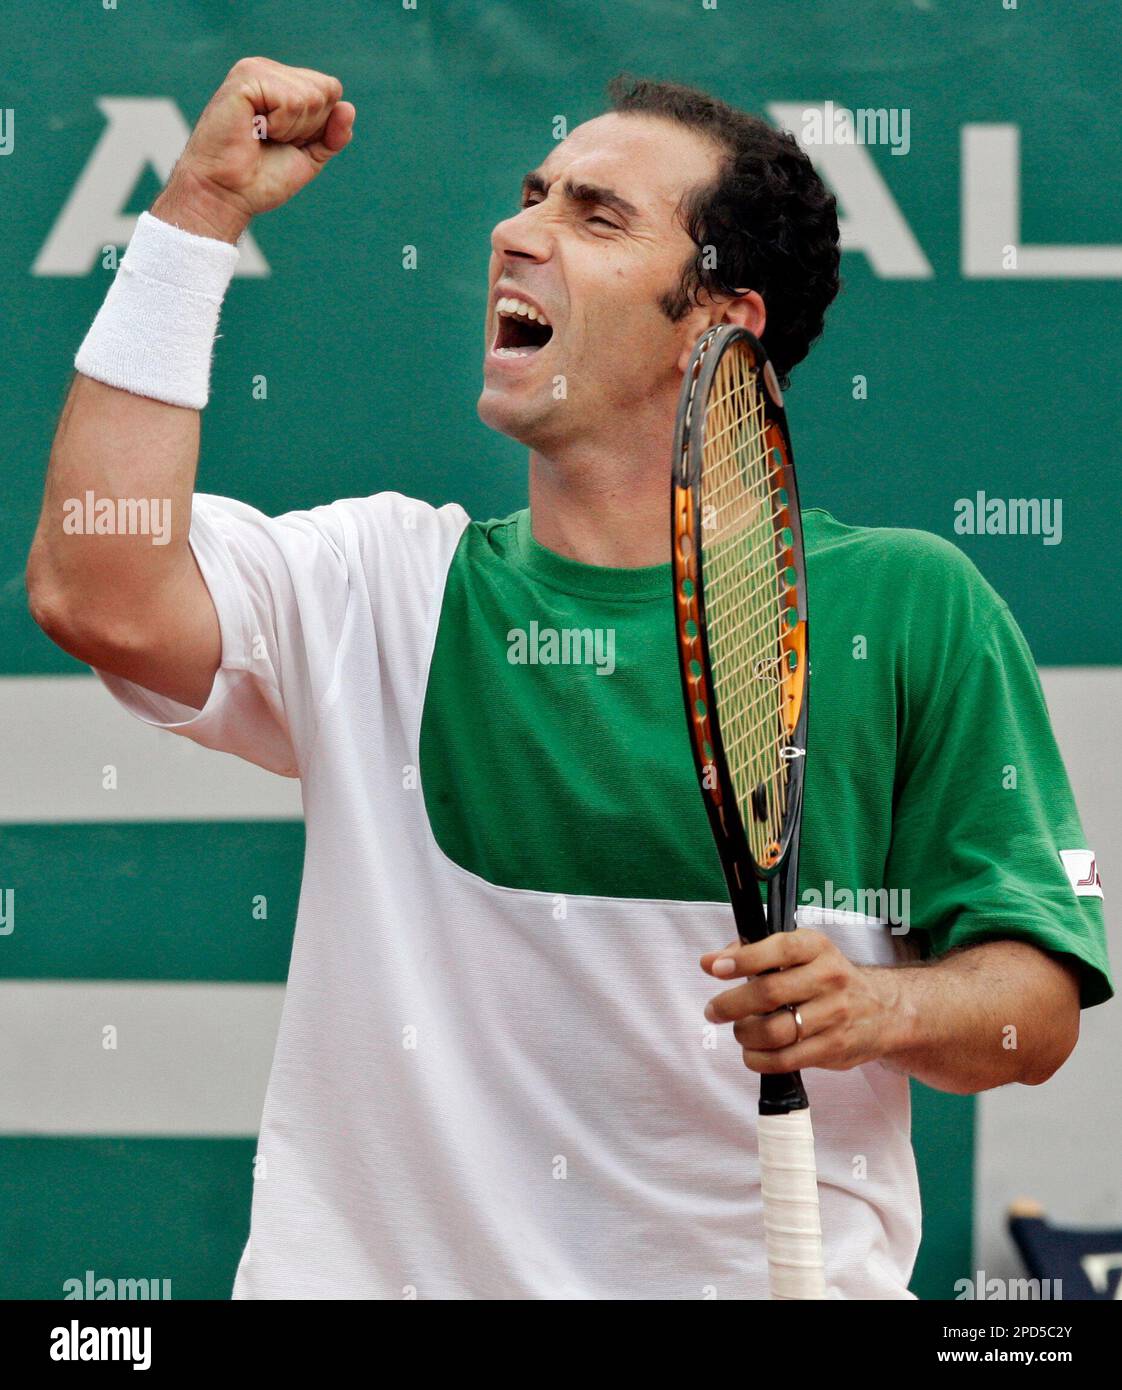 Spanish tennis player Albert Costa reacts after winning a point against  Juan Carlos Ferrero, from Spain, at the Open Seat Godo 2006 in Barcelona,  Spain, Thursday, April 27, 2006. Ferrero won 6-1,